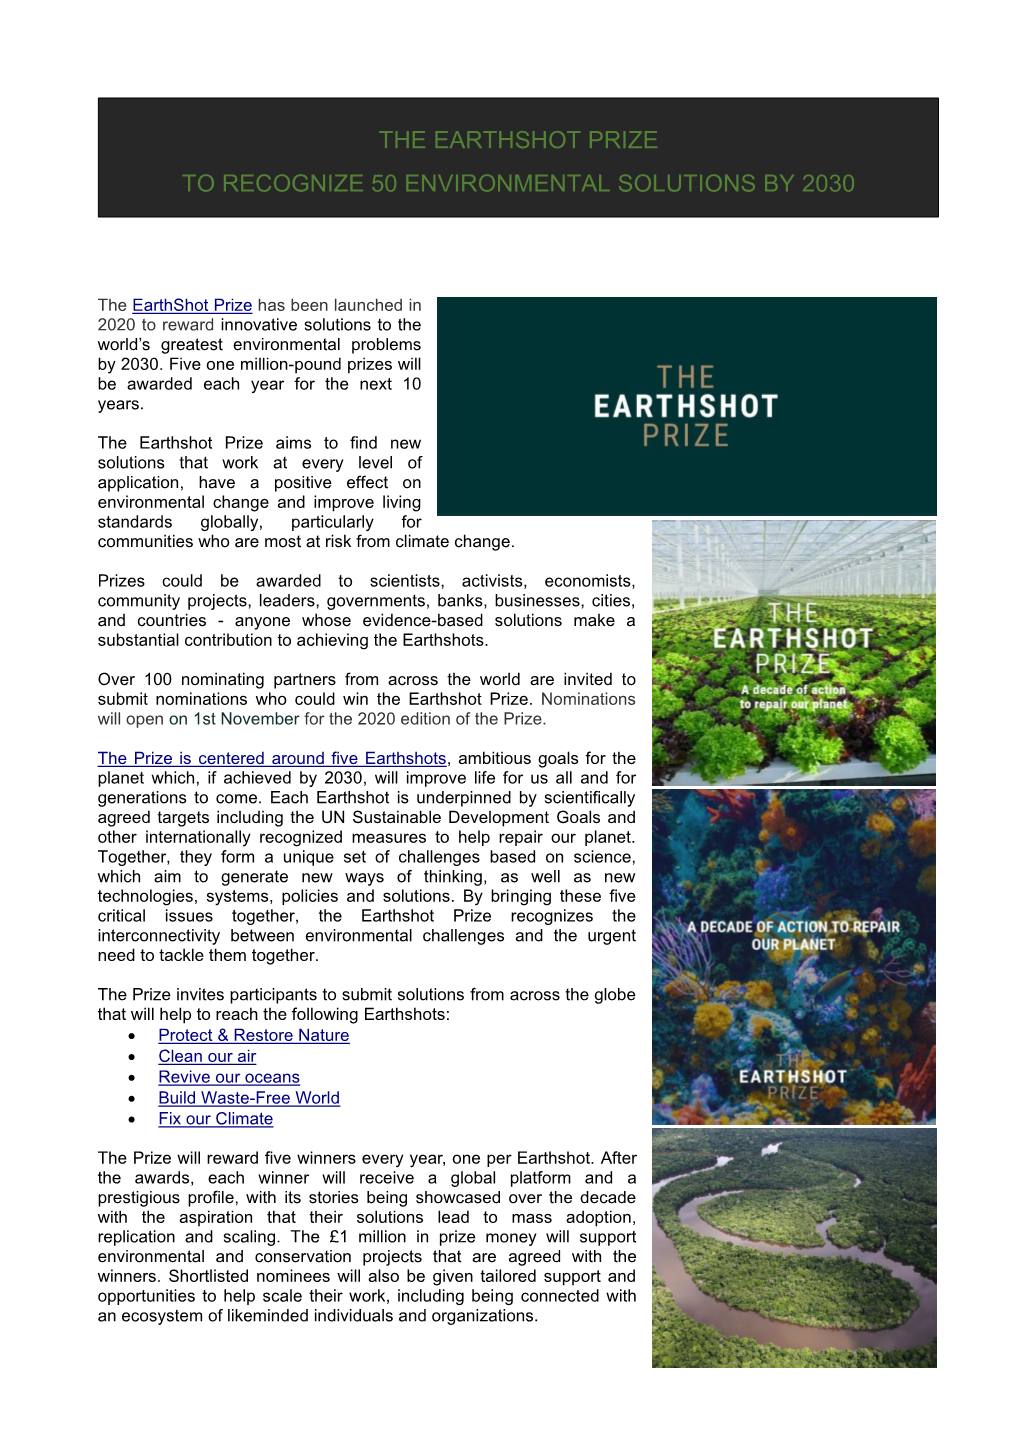 The Earthshot Prize to Recognize 50 Environmental Solutions by 2030